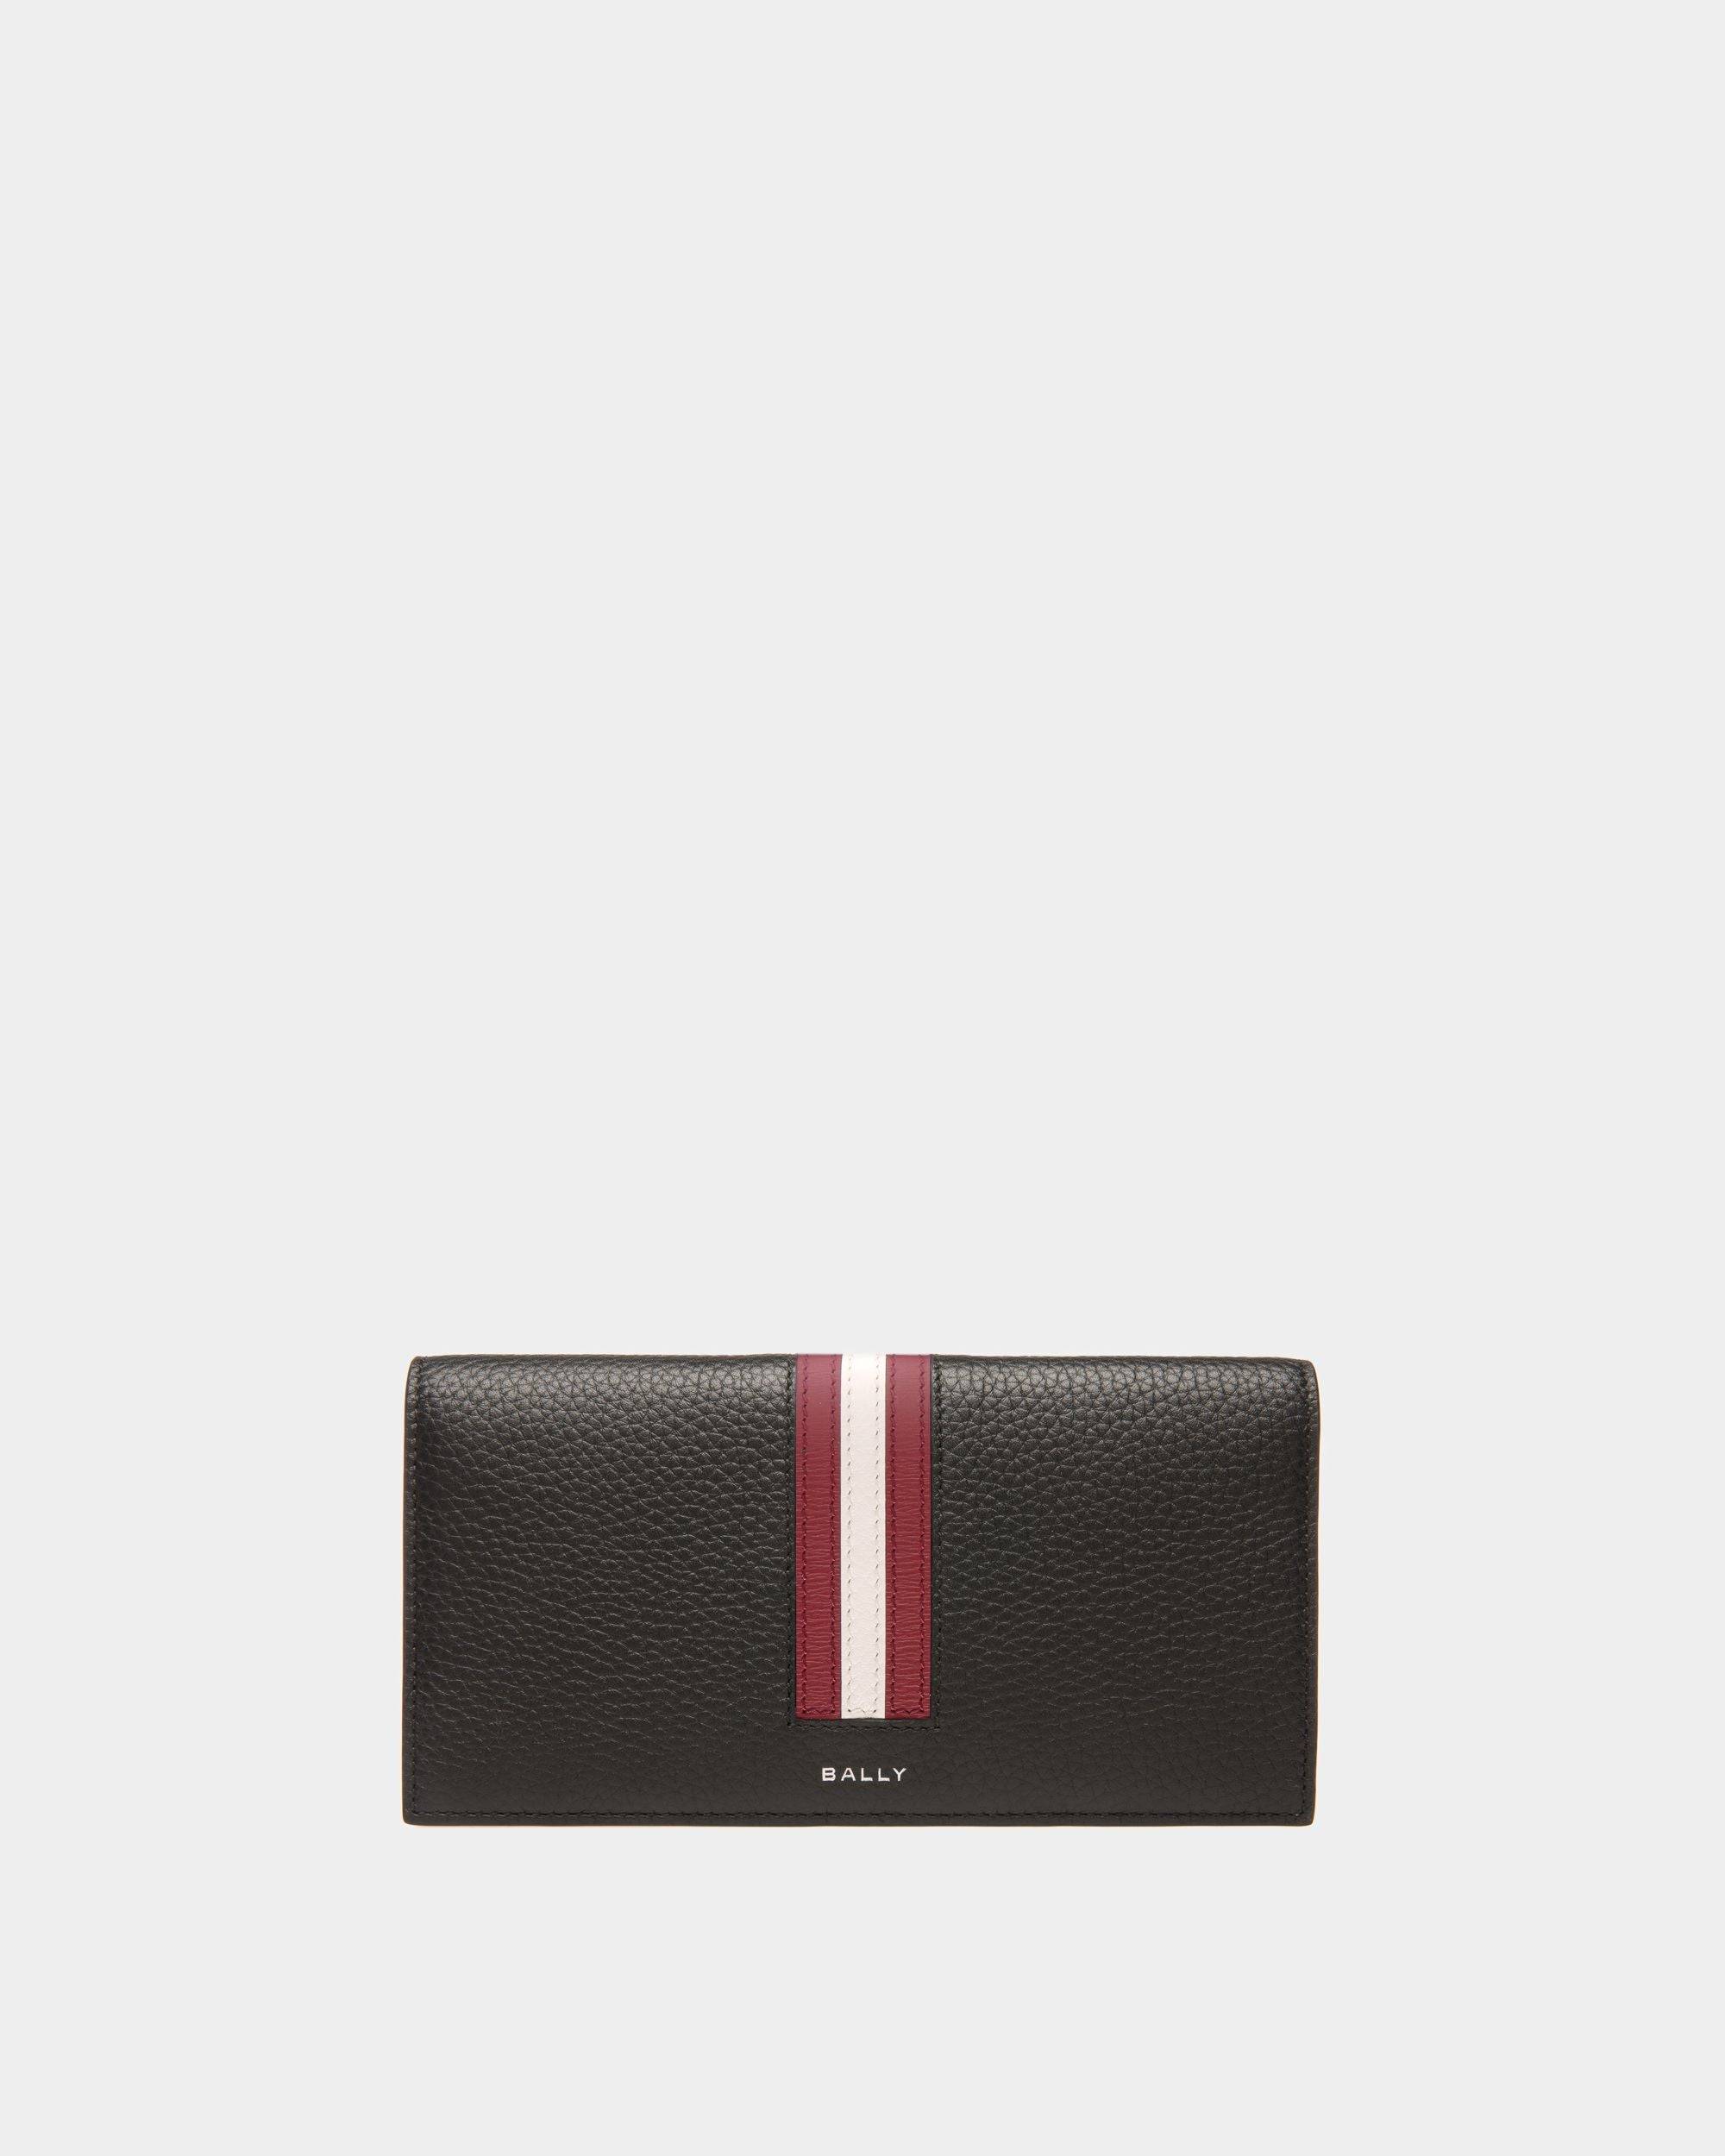 Men's Ribbon Continental Wallet in Black Grained Leather | Bally | Still Life Front